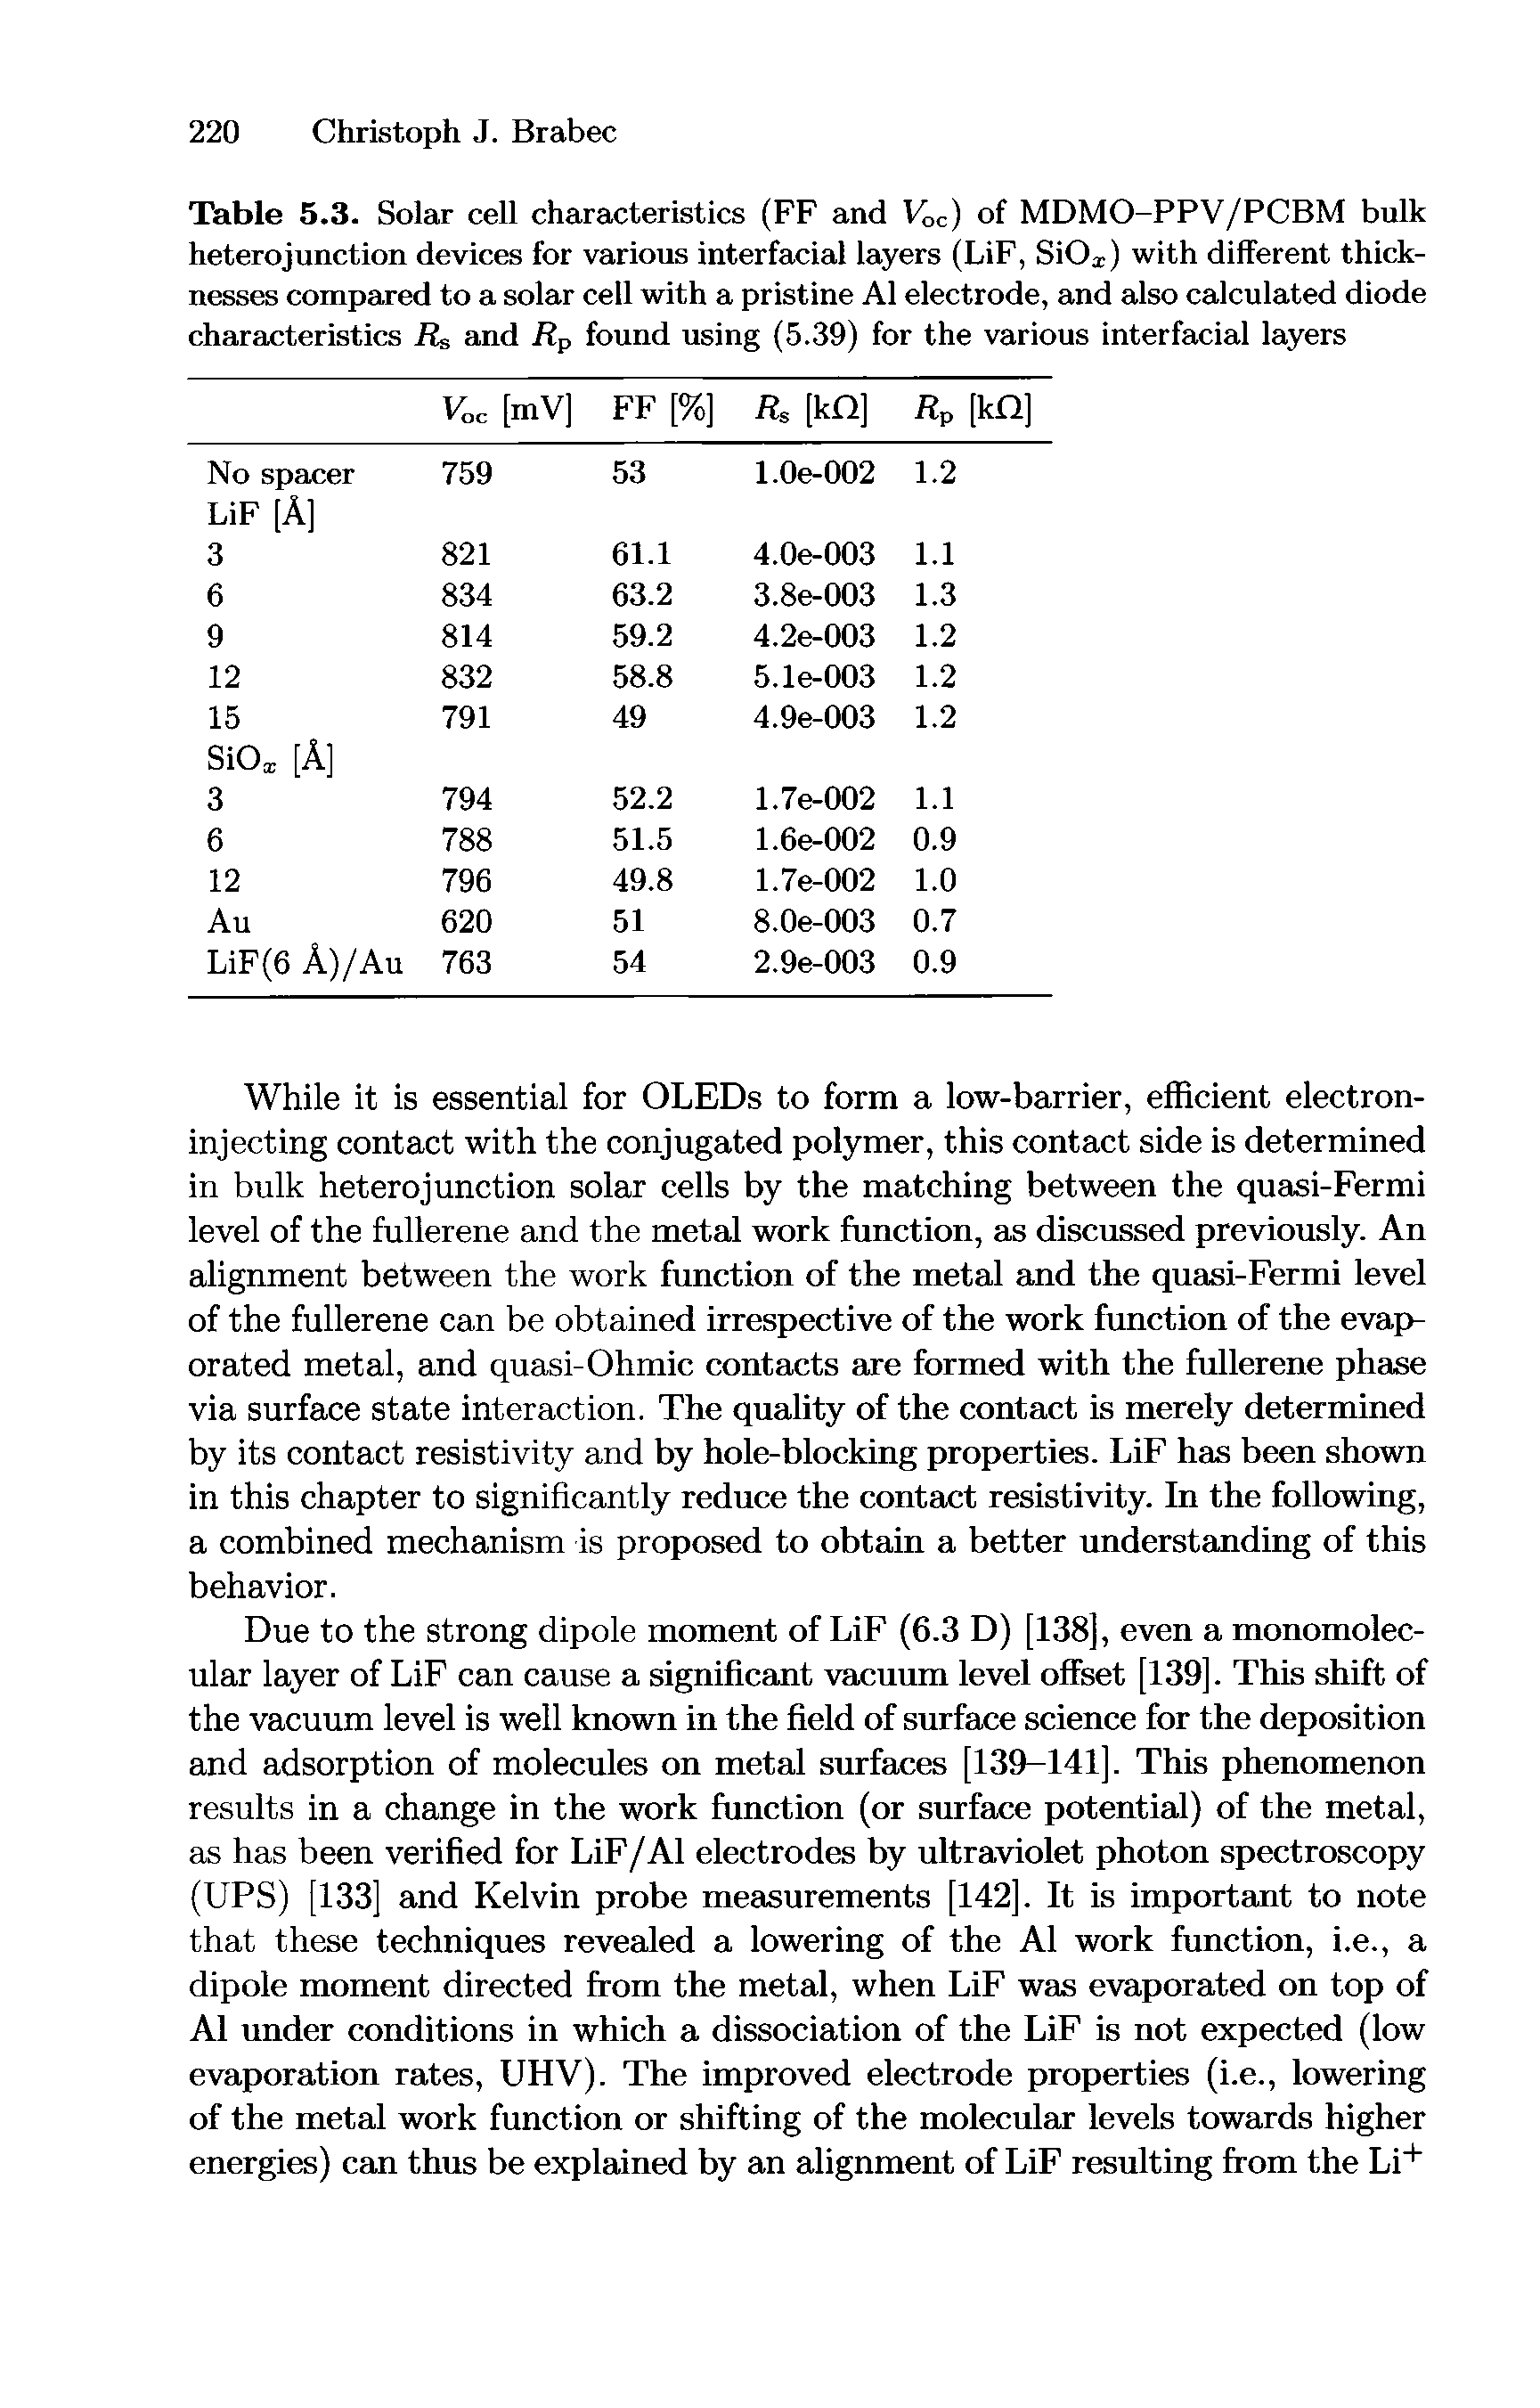 Table 5.3. Solar cell characteristics (PF and Voc) of MDMO-PPV/PCBM bulk heterojunction devices for various interfacial layers (LiF, SiO ) with different thicknesses compared to a solar cell with a pristine A1 electrode, and also calculated diode characteristics Rs and Rp found using (5.39) for the various interfacial layers...